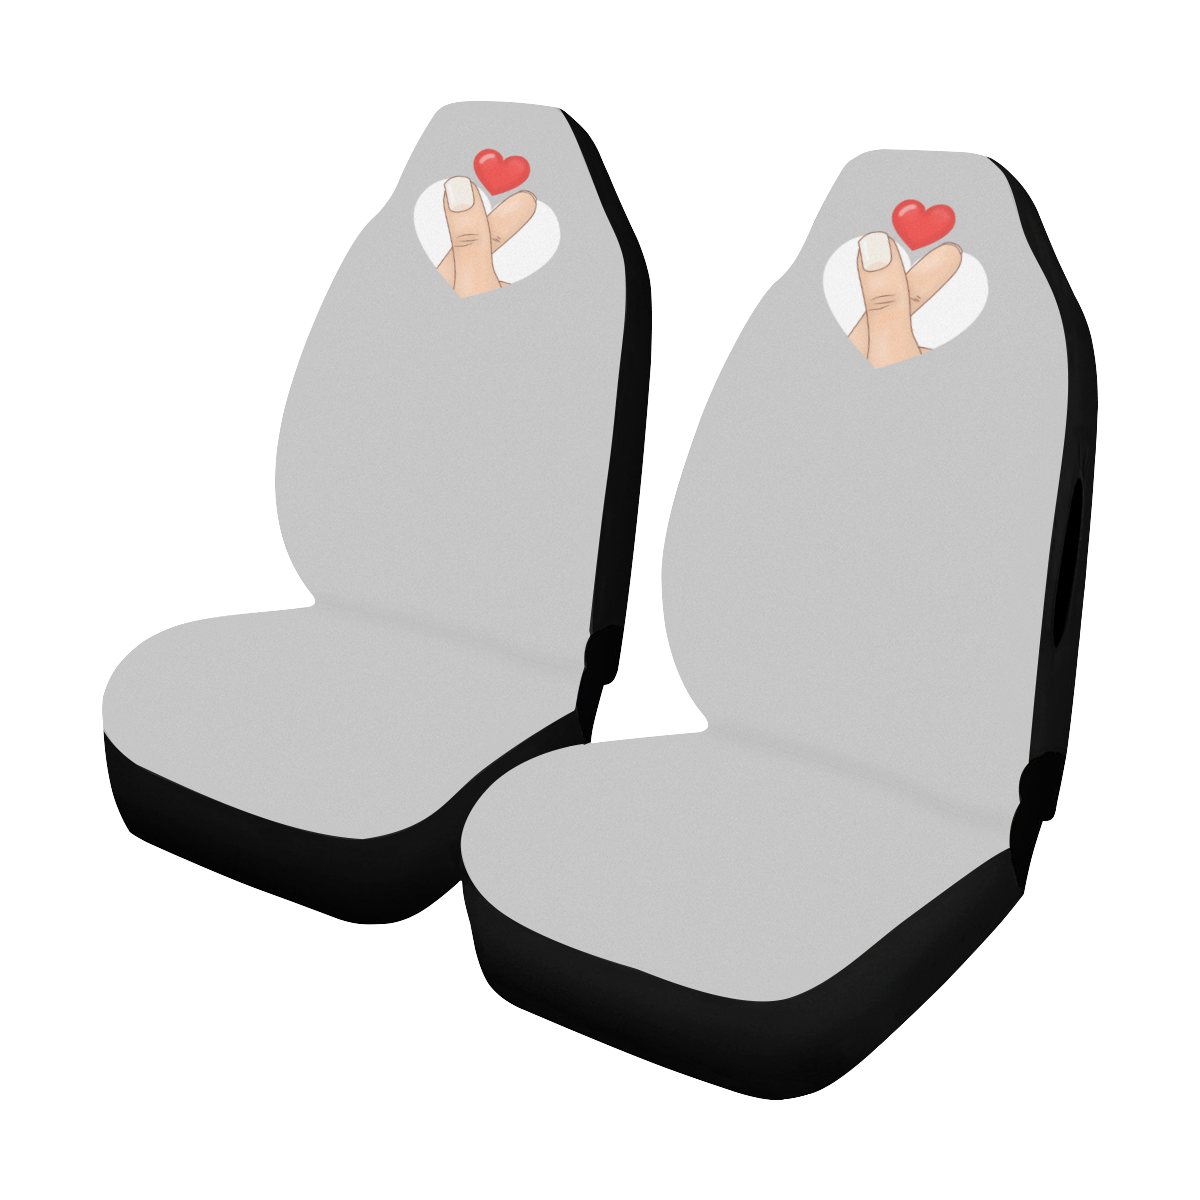 Red Heart Fingers on Silver Car Seat Cover Airbag Compatible (Set of 2)